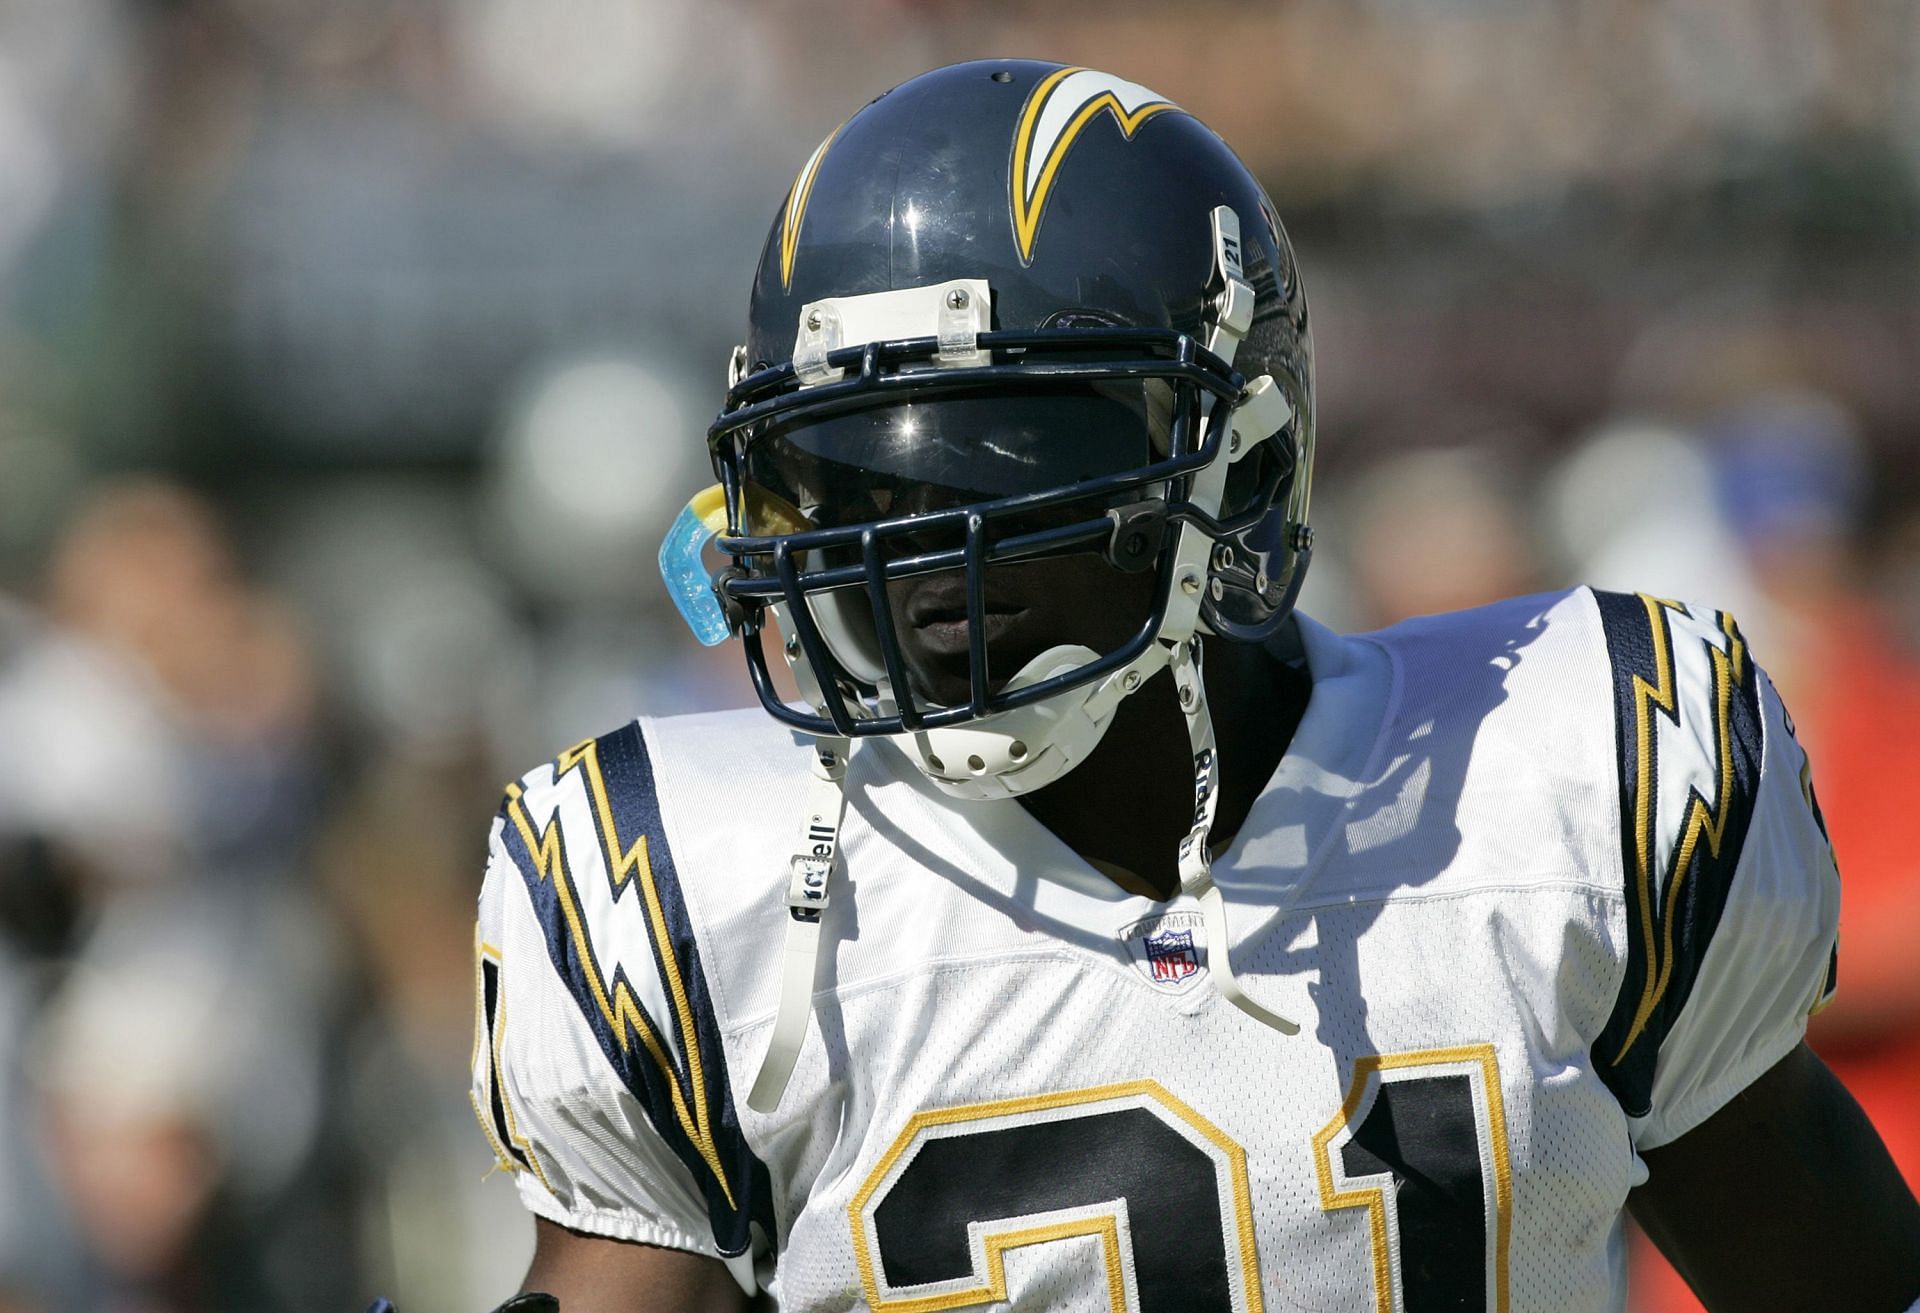 San Diego Chargers RB LaDainian Tomlinson